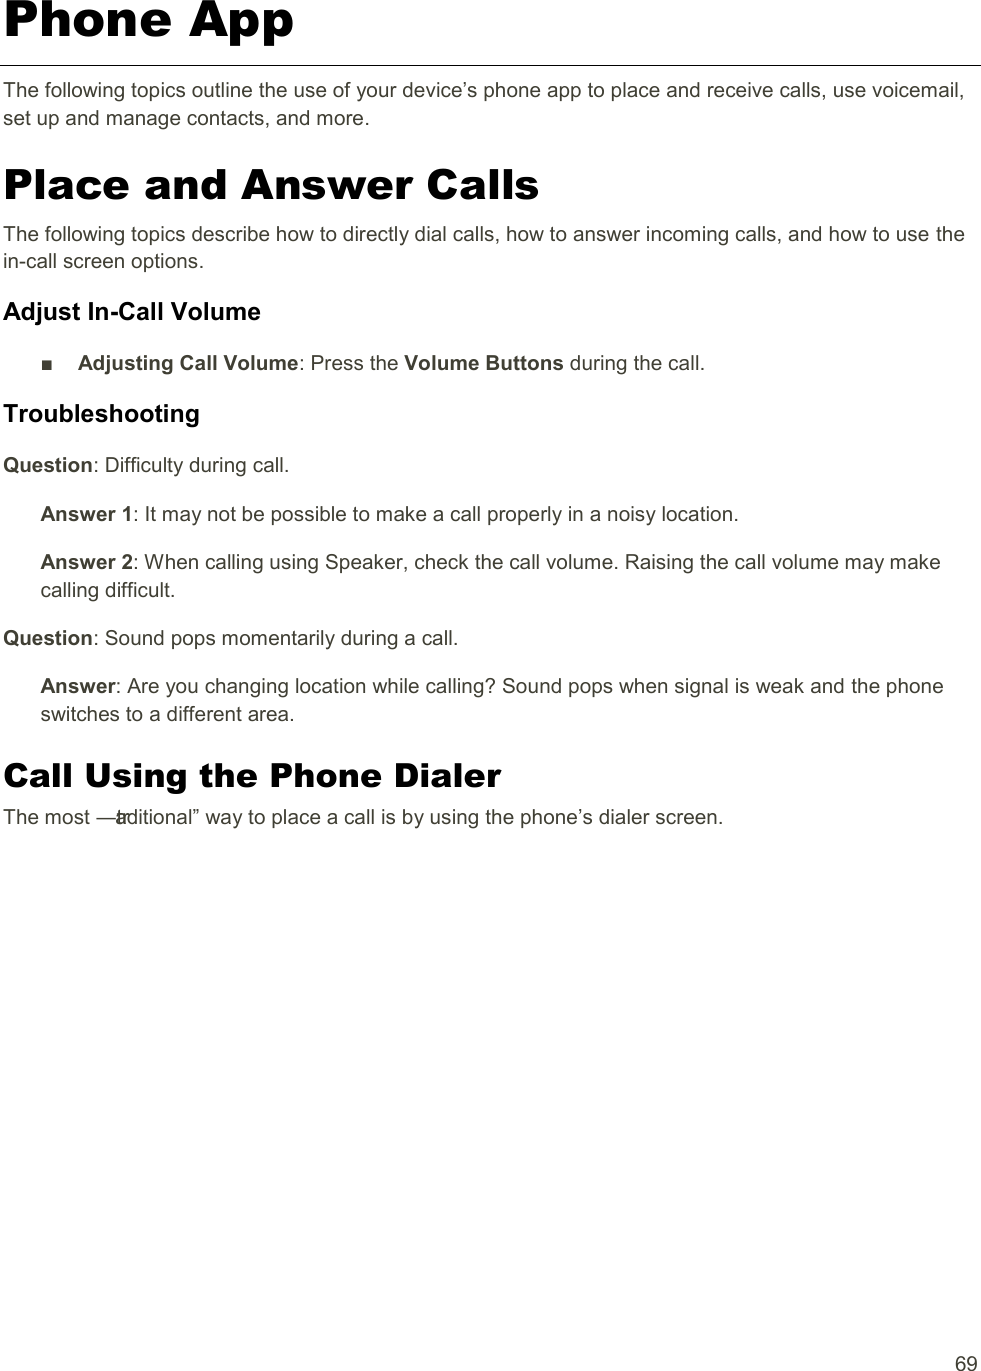  69 Phone App The following topics outline the use of your device’s phone app to place and receive calls, use voicemail, set up and manage contacts, and more. Place and Answer Calls The following topics describe how to directly dial calls, how to answer incoming calls, and how to use the in-call screen options. Adjust In-Call Volume ■  Adjusting Call Volume: Press the Volume Buttons during the call. Troubleshooting Question: Difficulty during call. Answer 1: It may not be possible to make a call properly in a noisy location. Answer 2: When calling using Speaker, check the call volume. Raising the call volume may make calling difficult. Question: Sound pops momentarily during a call. Answer: Are you changing location while calling? Sound pops when signal is weak and the phone switches to a different area. Call Using the Phone Dialer The most ―traditional‖ way to place a call is by using the phone’s dialer screen.  